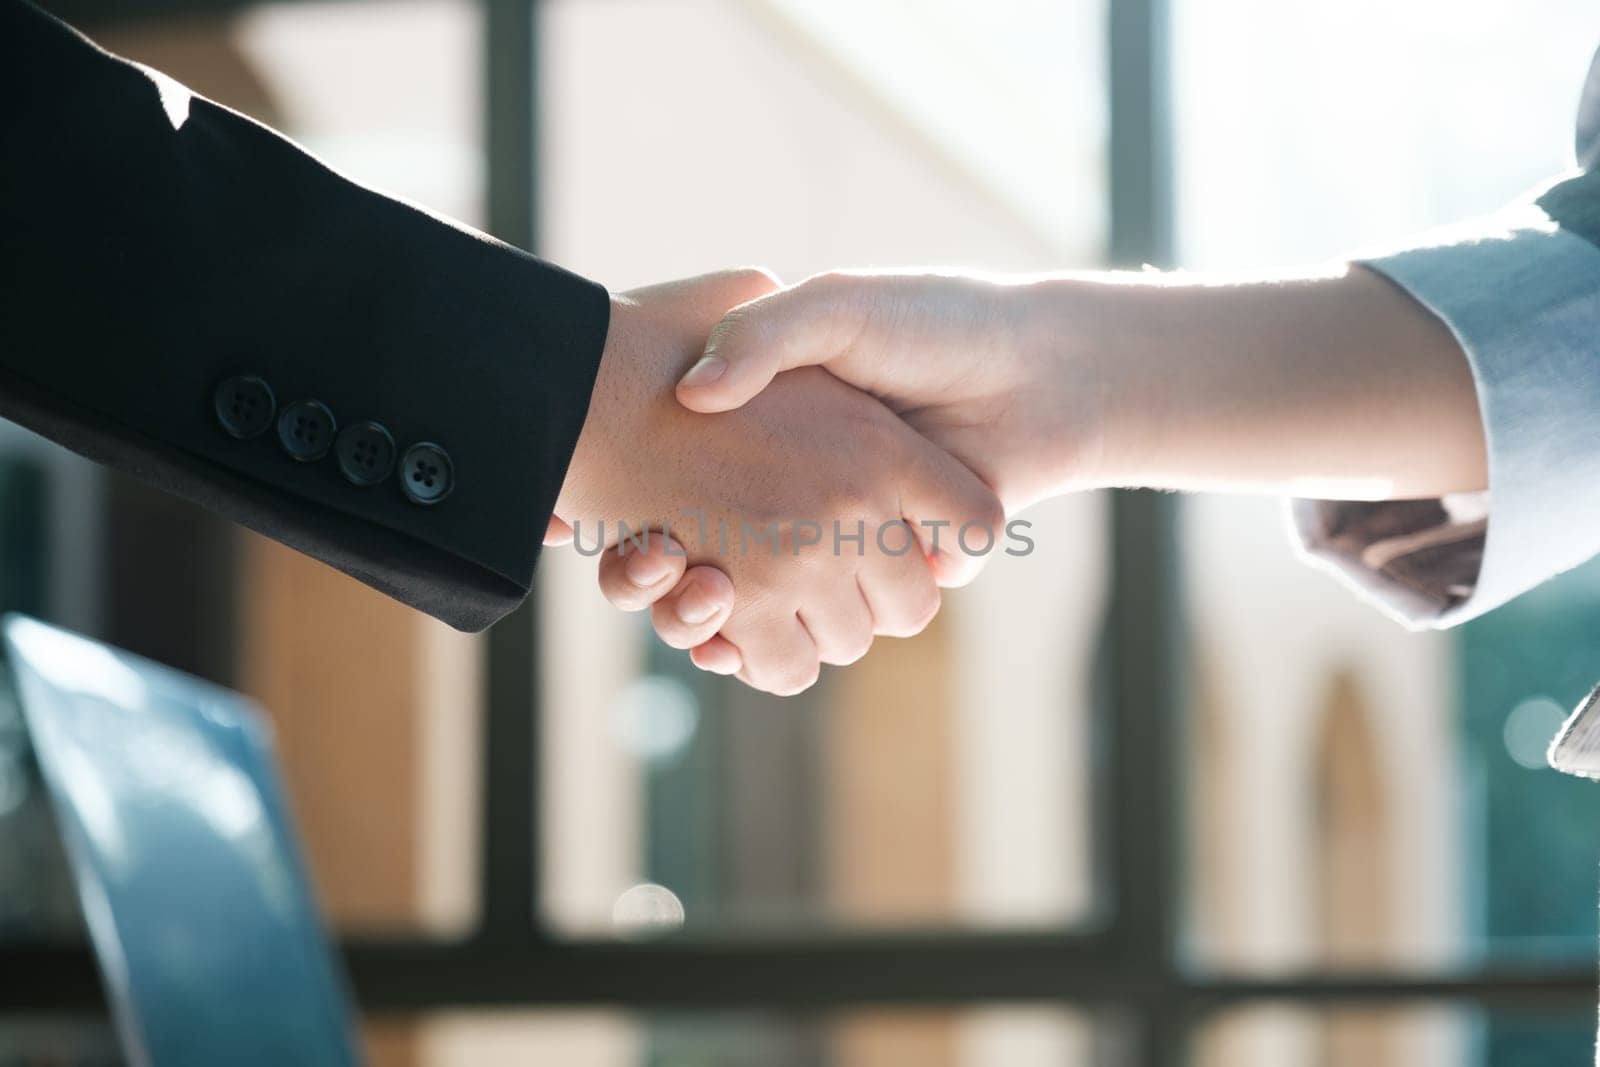 Two people shaking hands in a business setting by ijeab